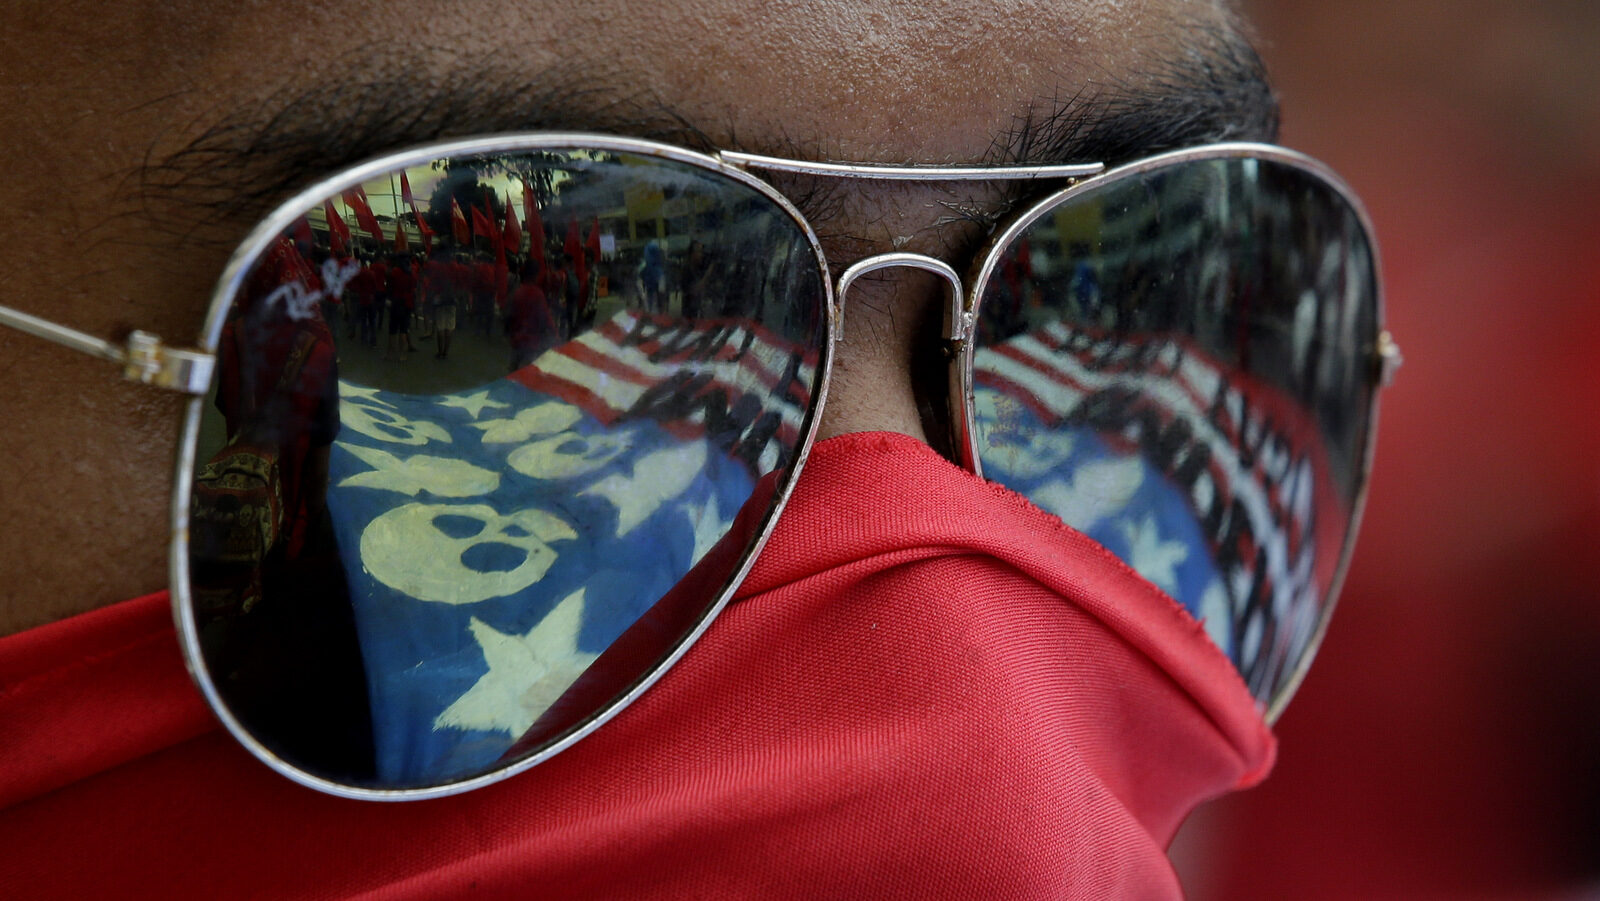 A mock U.S. flag is reflected on the eyeglasses of a protester during a rally near the venue of ASEAN summit and meetings in Manila, Philippines on Nov. 12, 2017. The group is protesting against the visit of U.S. President Donald Trump, who is currently on a trip to Asia with the Philippines as his last stop for the ASEAN leaders' summit and related summits between the regional grouping and its Dialogue Partners. (AP/Aaron Favila)